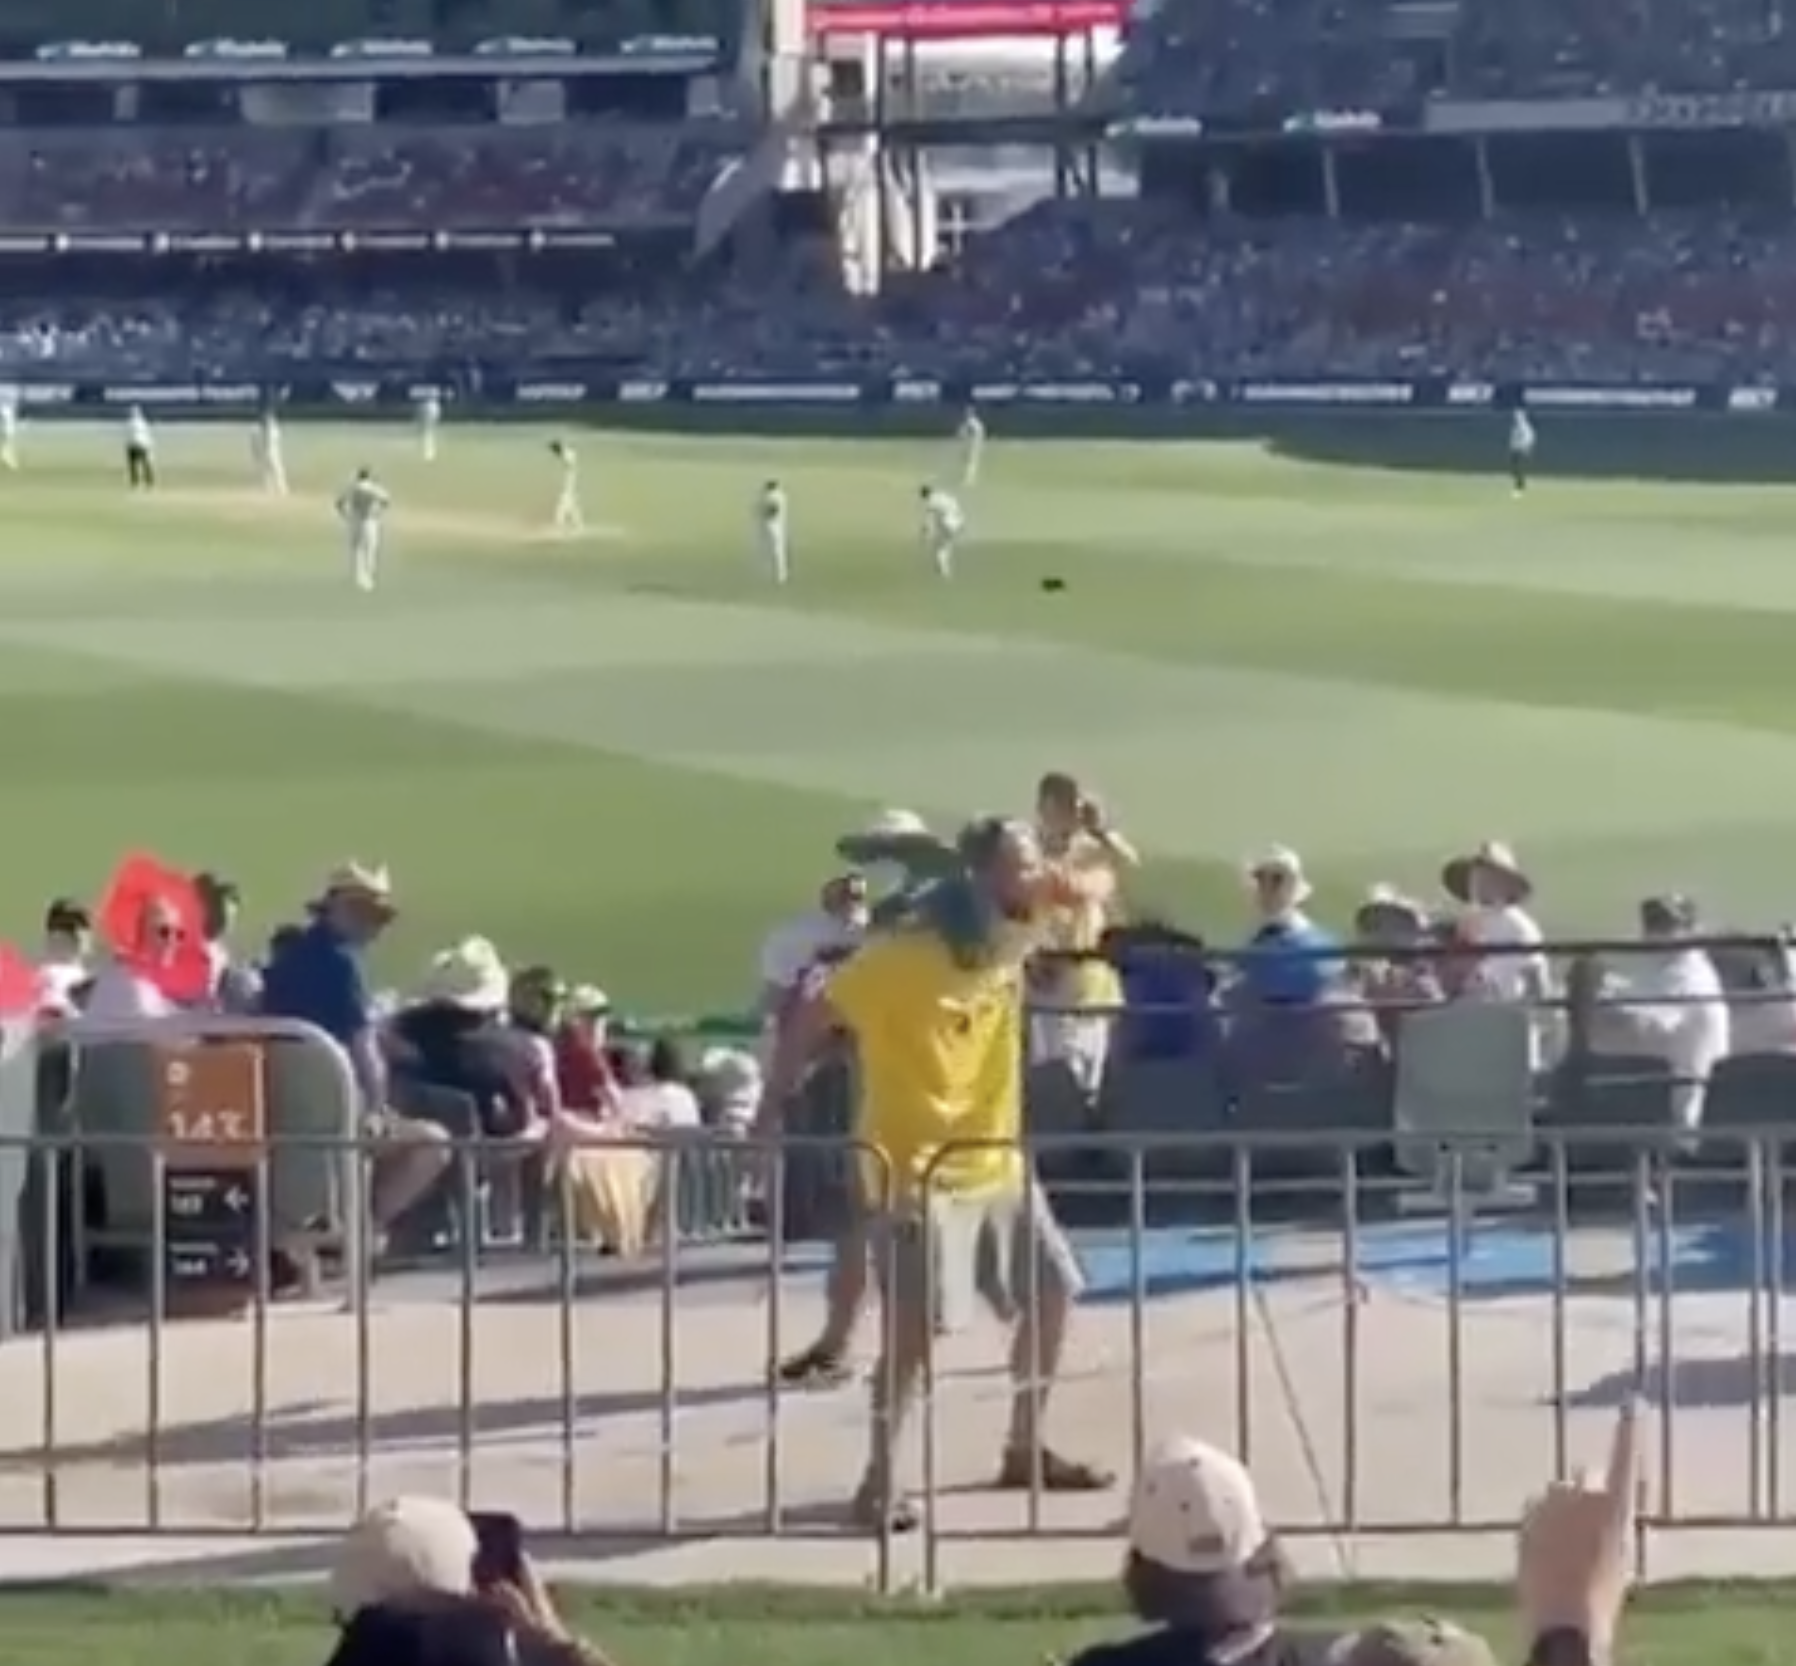 The Ashes - Aussie downs three beers